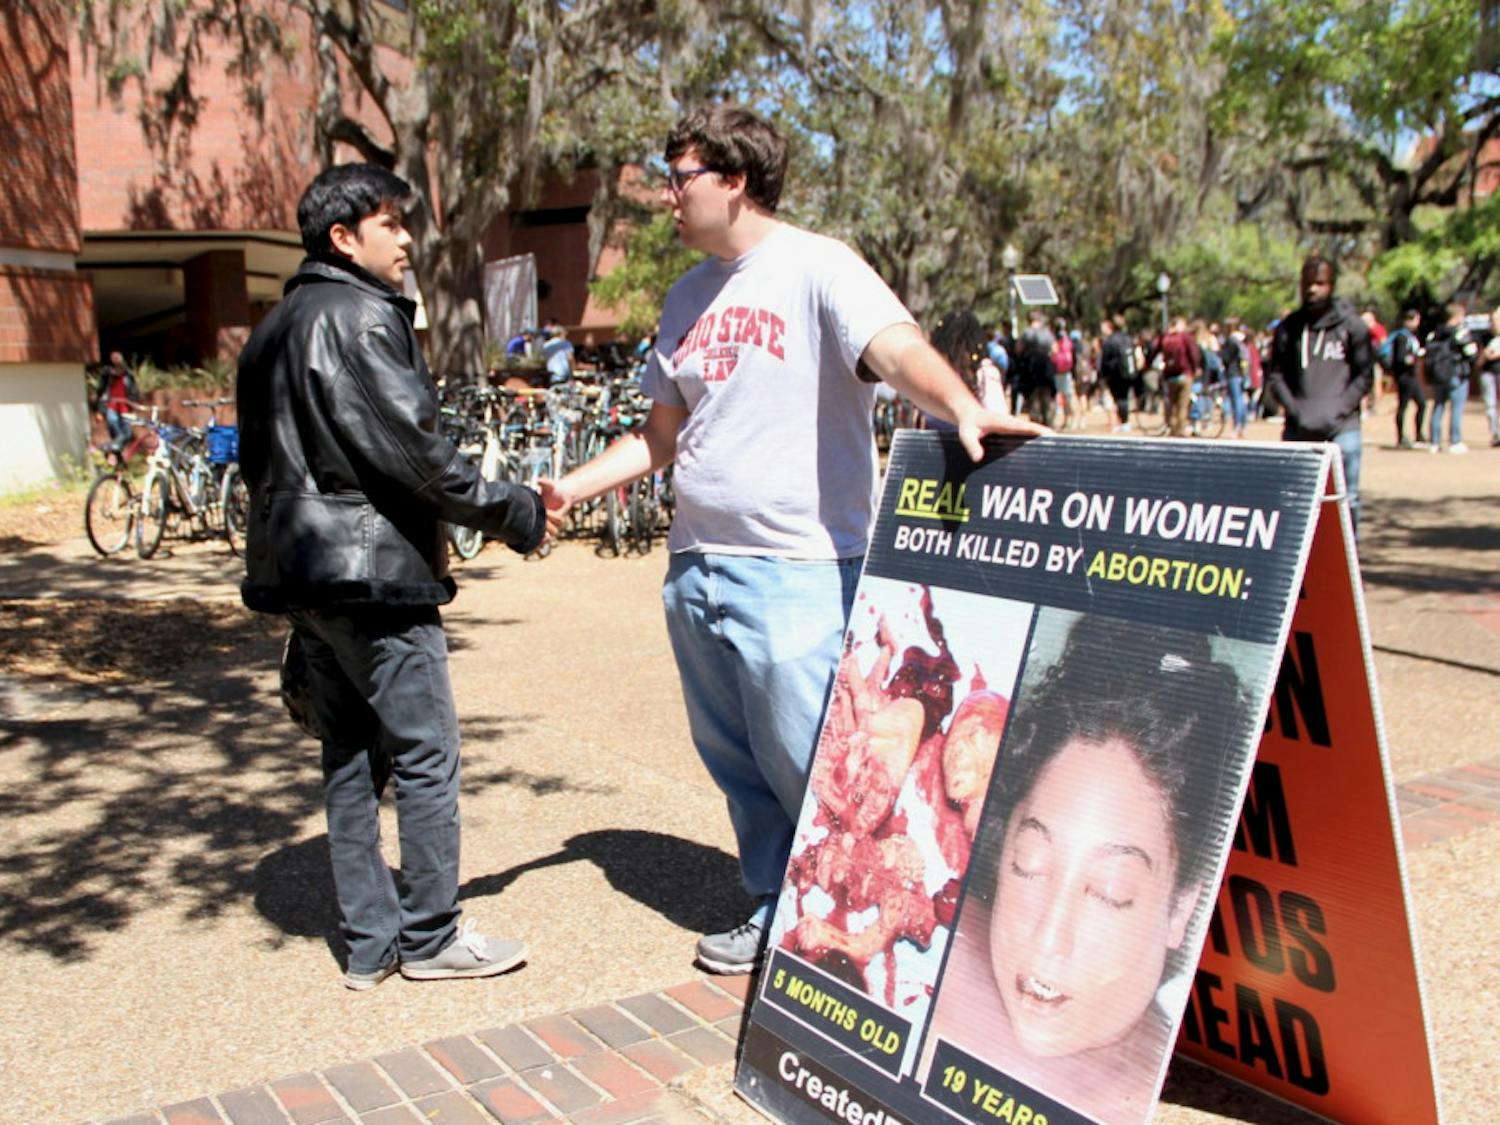 Alfredo Patiño, 22, a UF senior political science and sociology major, and Joe Trammel, 22, a law student from Ohio State University and member of the Created Equal organization, shake hands. Patiño and Trammel had a respectful conversation about the images the Created Equal organization placed on Turlington Plaza on Tuesday.